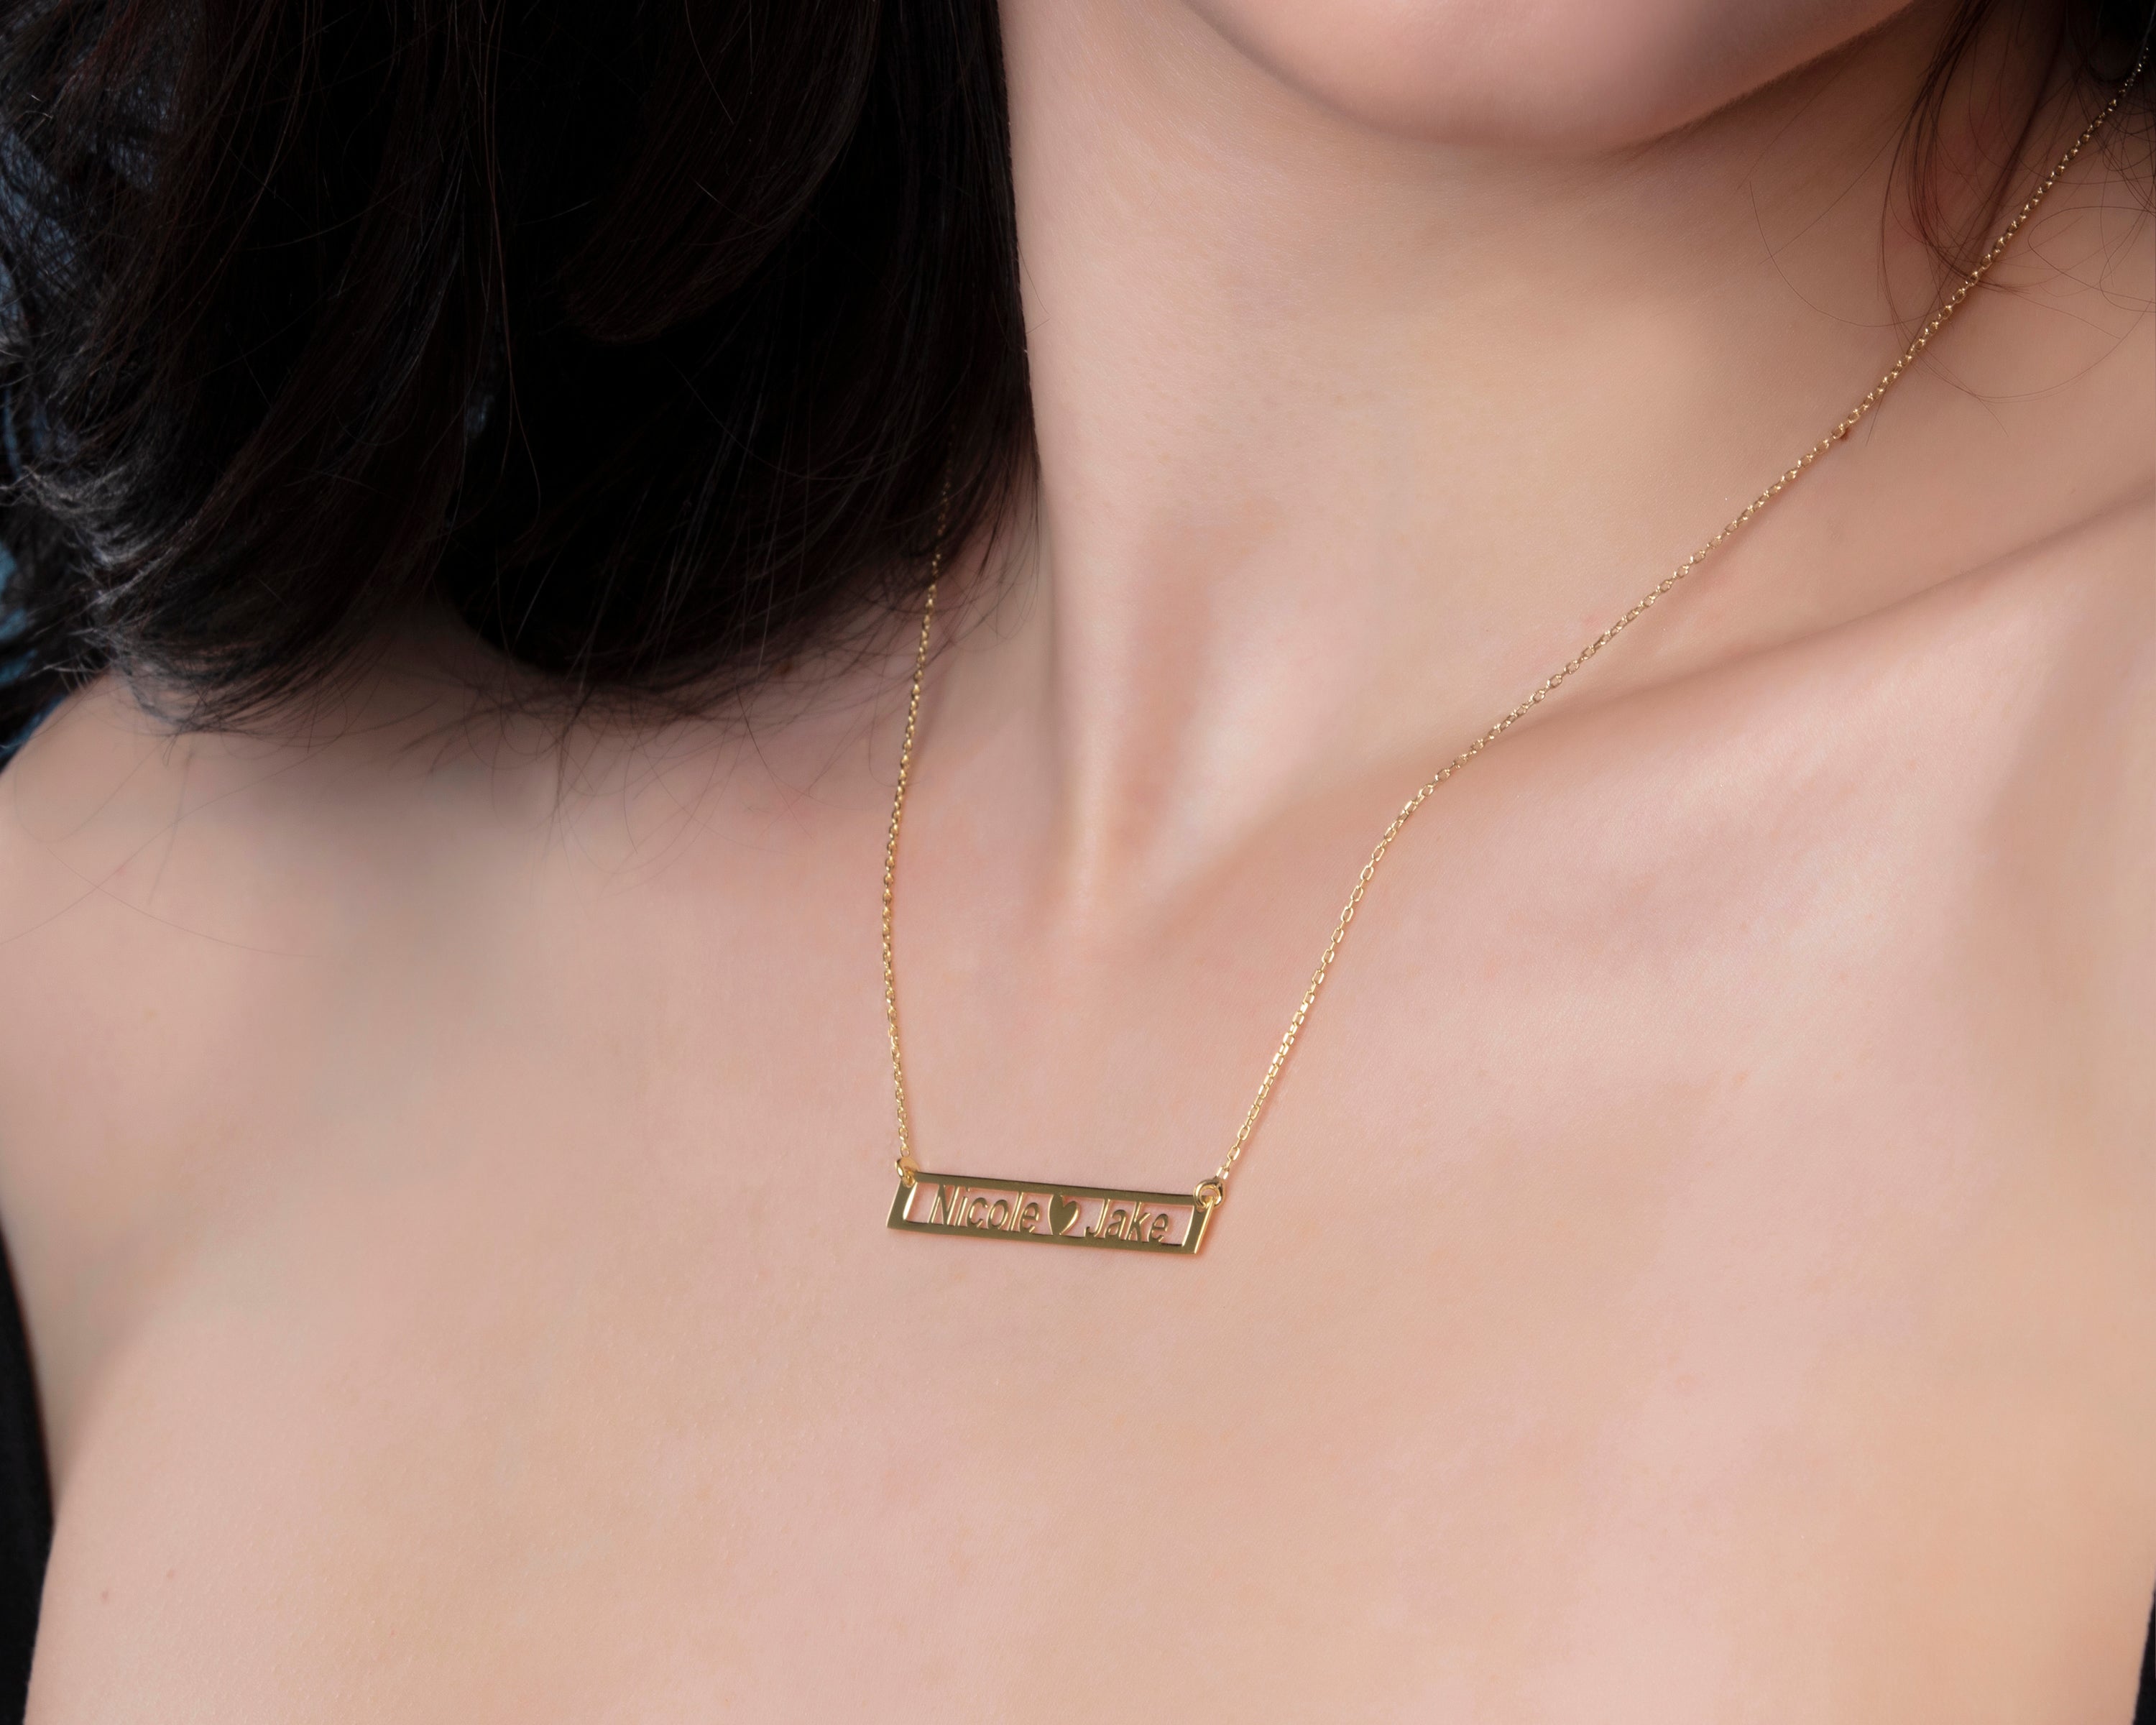 The Canna 14K Gold Plated Custom Love Necklace